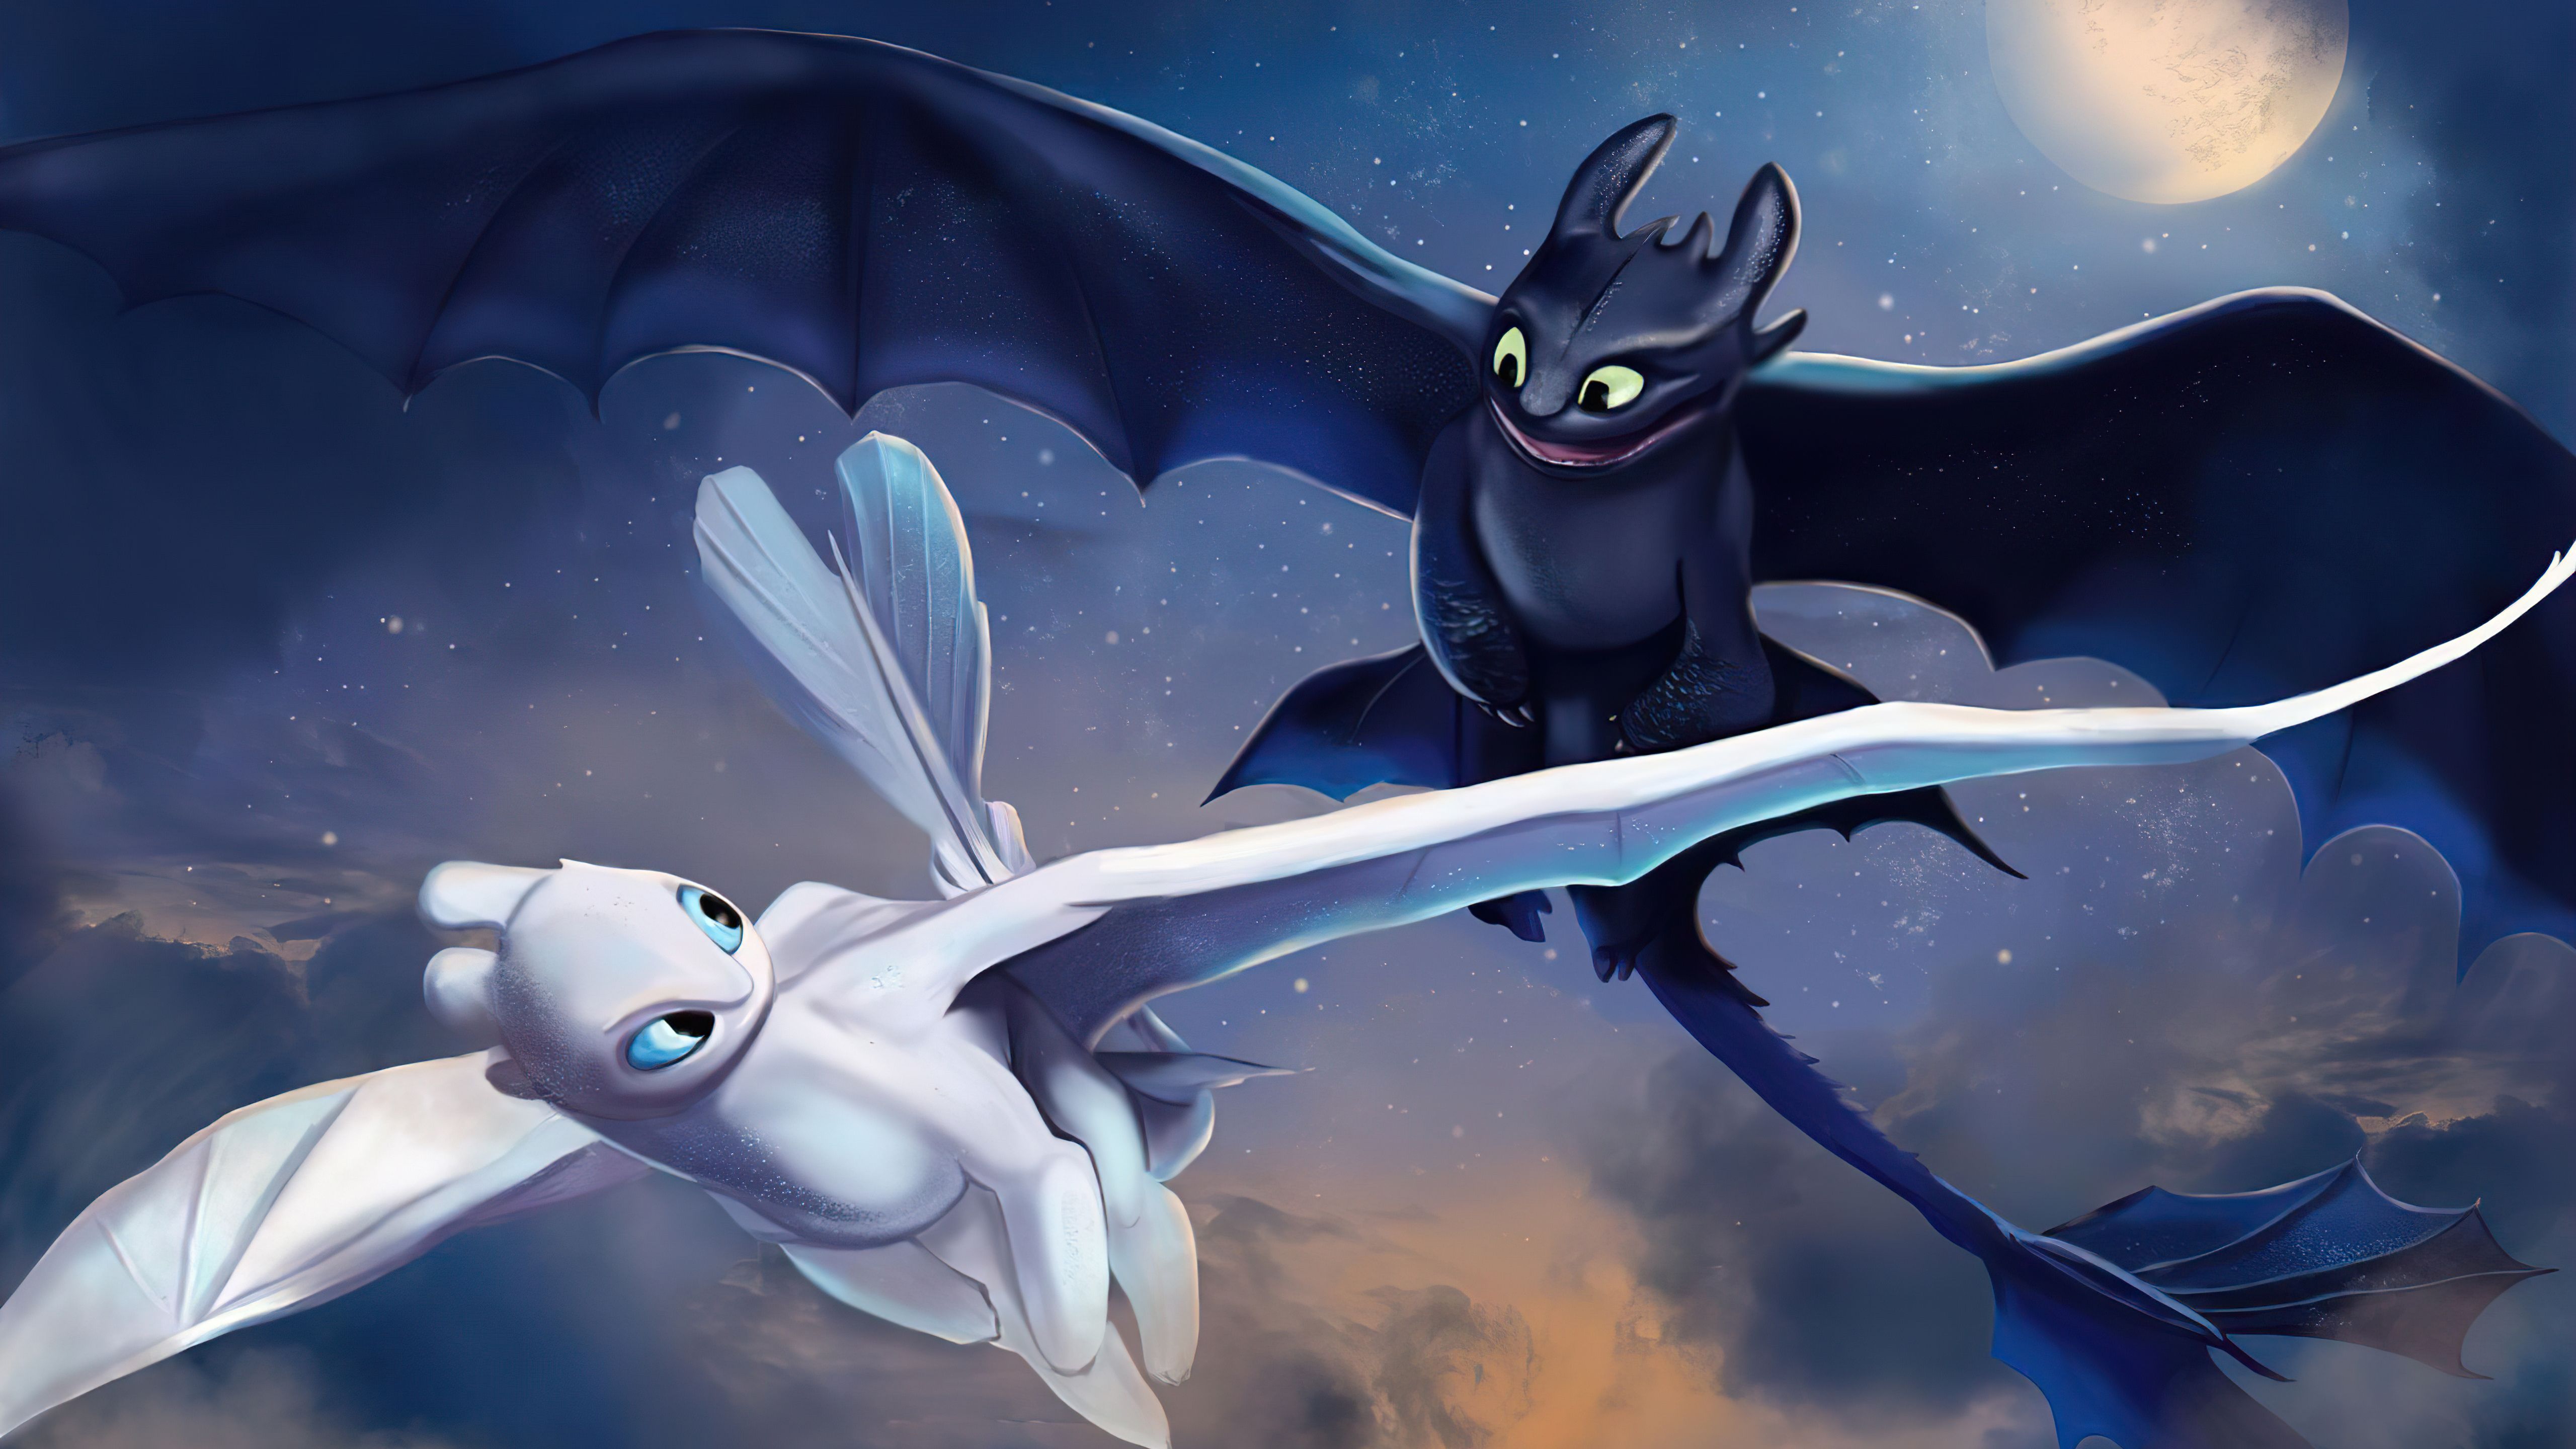 Toothless And The Lightfury Wallpapers - Wallpaper Cave.